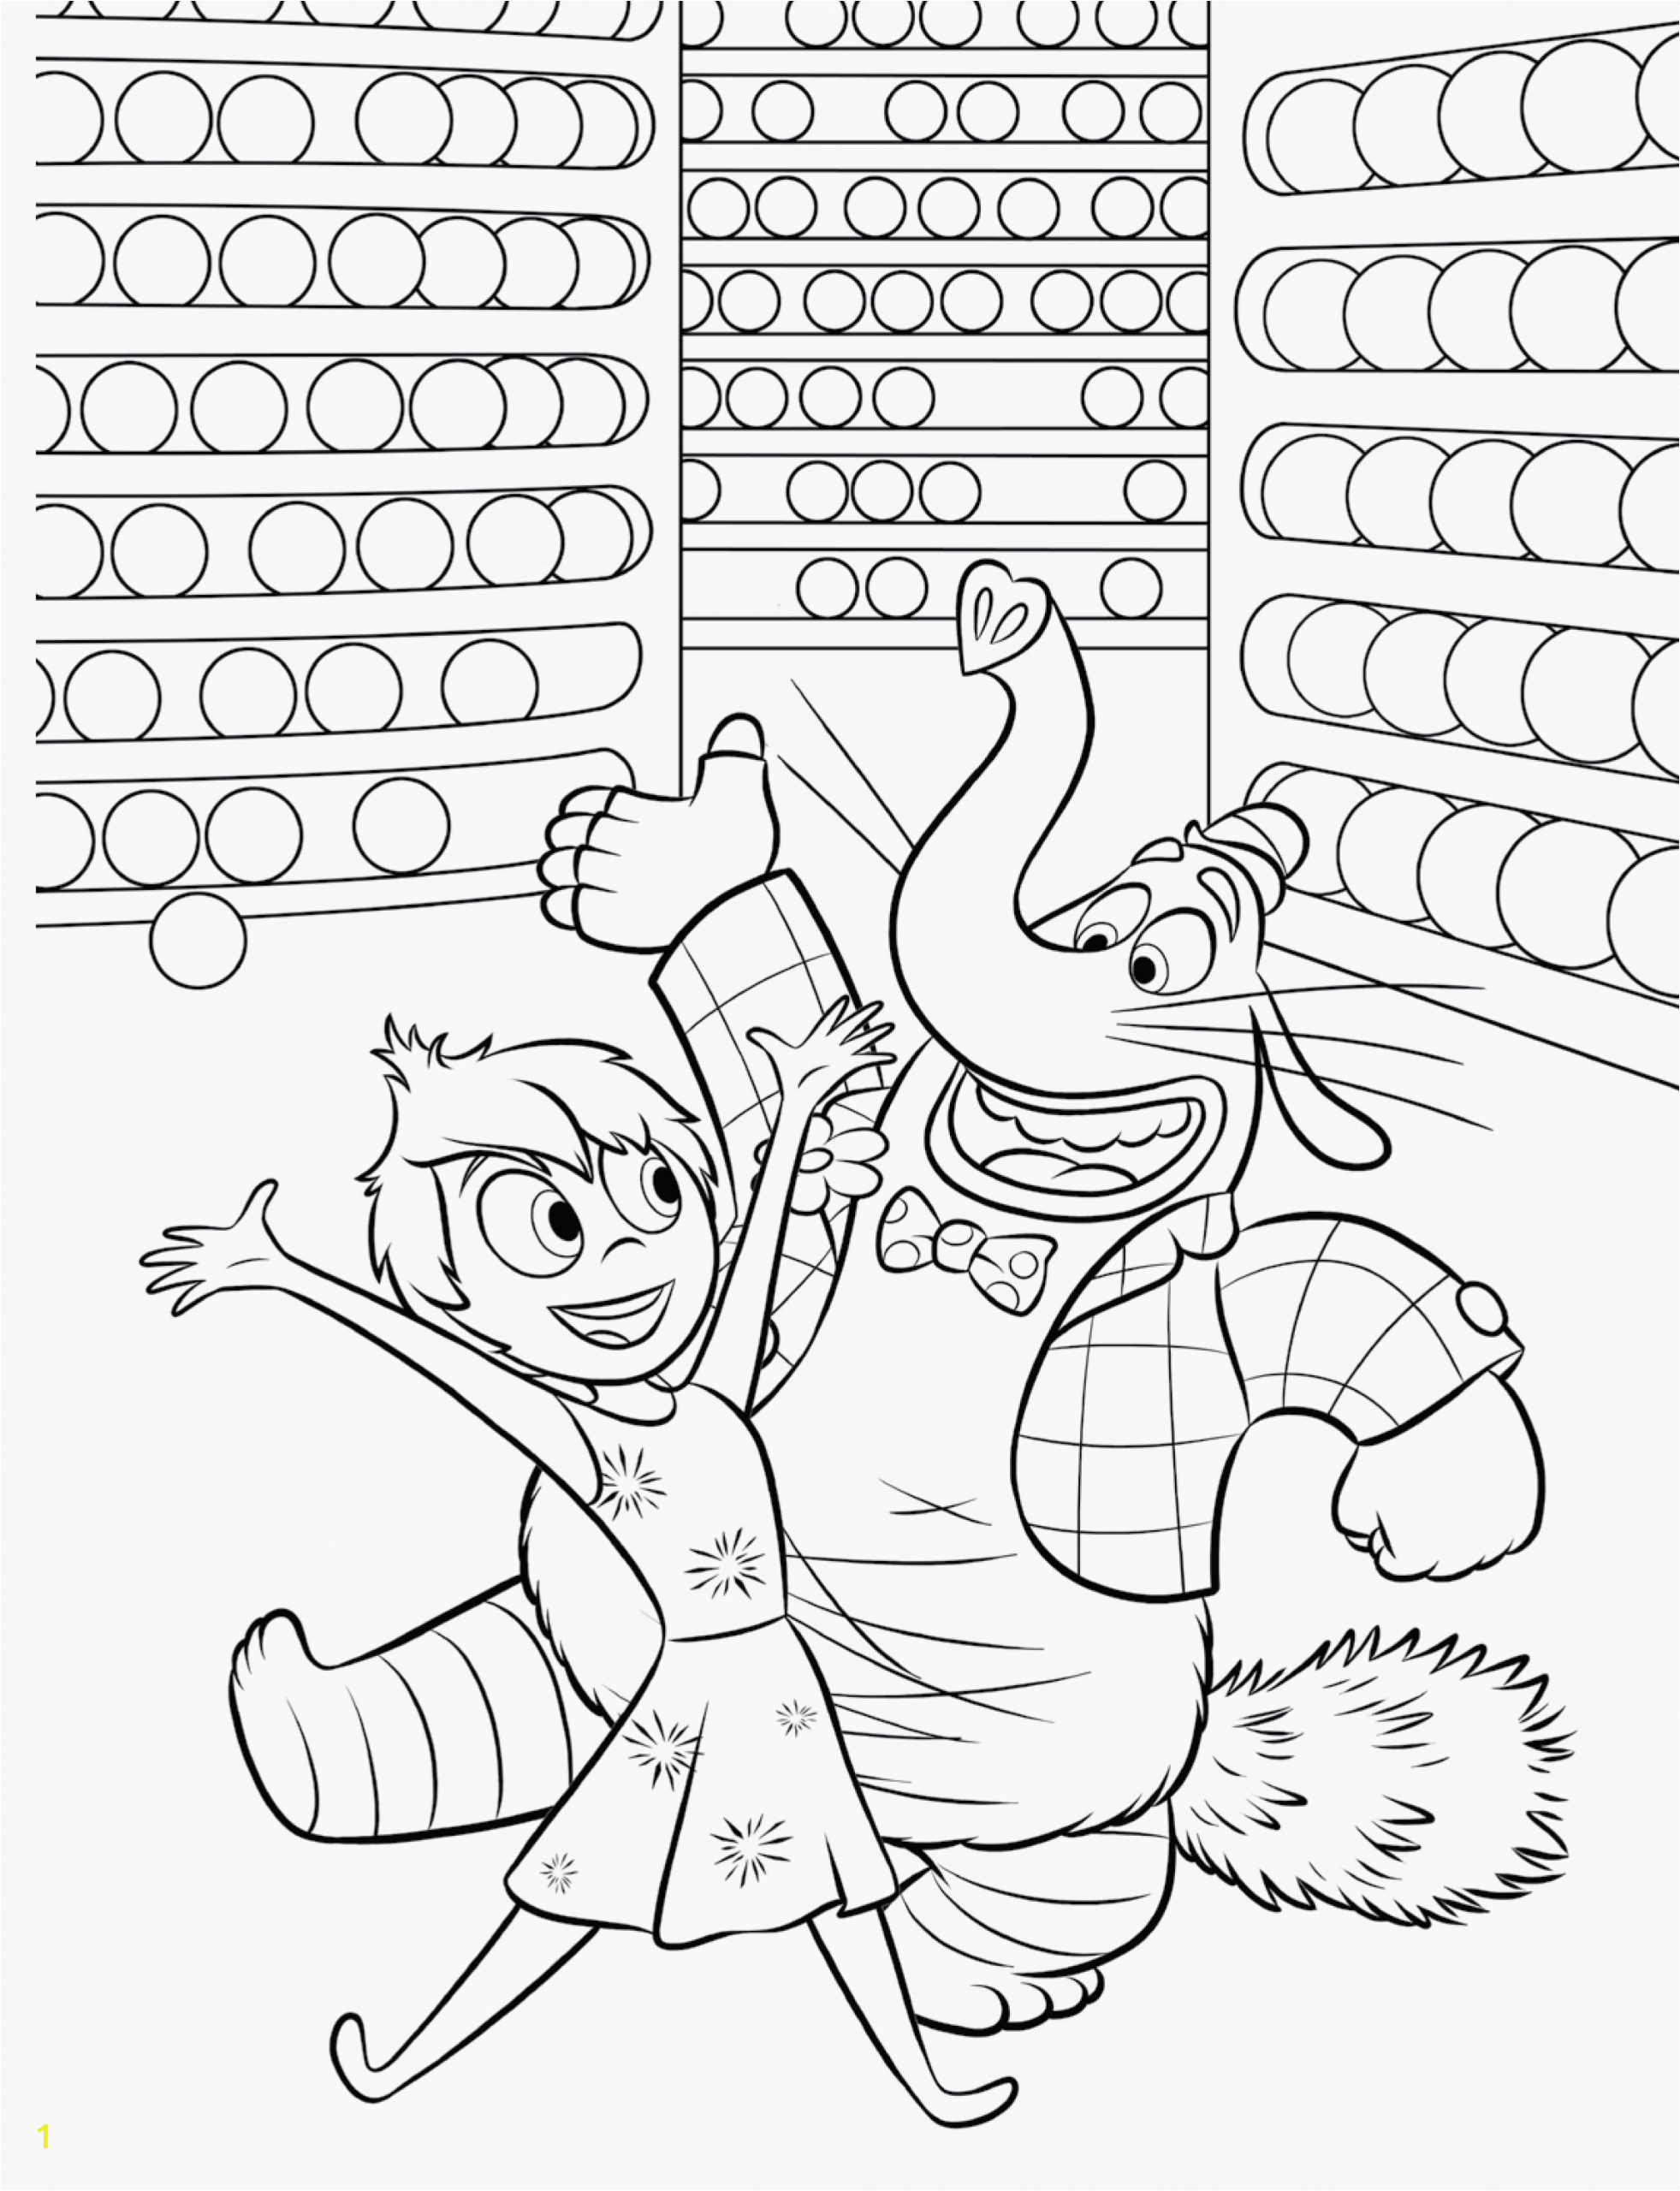 Coloring Pages for 5 Year Old Boy Color Pages astonishing Coloring Pages 5 Year Olds